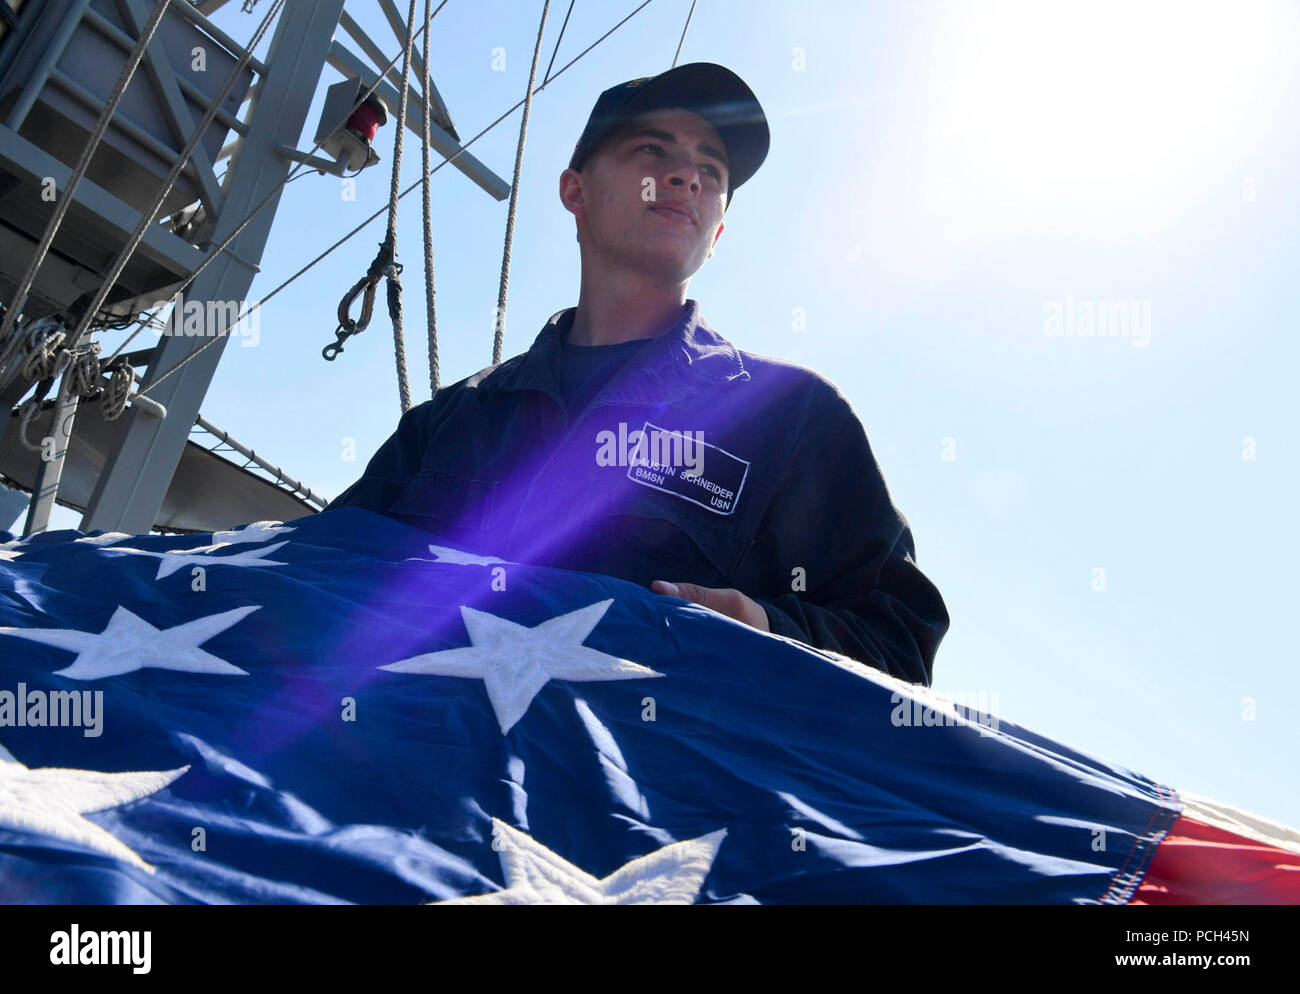 U.S. 5TH FLEET AREA OF OPERATIONS (Feb. 7, 2018) Boatswain’s Mate Seaman Austin Schneider helps fold a battle ensign aboard the coastal patrol ship USS Hurricane (PC 3) during exercise Khunjar Haad. Khunjar Haad is a multilateral, surface, air and explosive ordnance disposal exercise with the U.S. Navy, U.S. Coast Guard, Royal Navy of Oman, Royal Air Force of Oman, Royal Saudi Naval Forces, France’s Marine Nationale and United Kingdom’s Royal Navy in order to enhance interoperability, mutual capability and support long-term regional cooperation of forces in the Arabian Gulf. Stock Photo